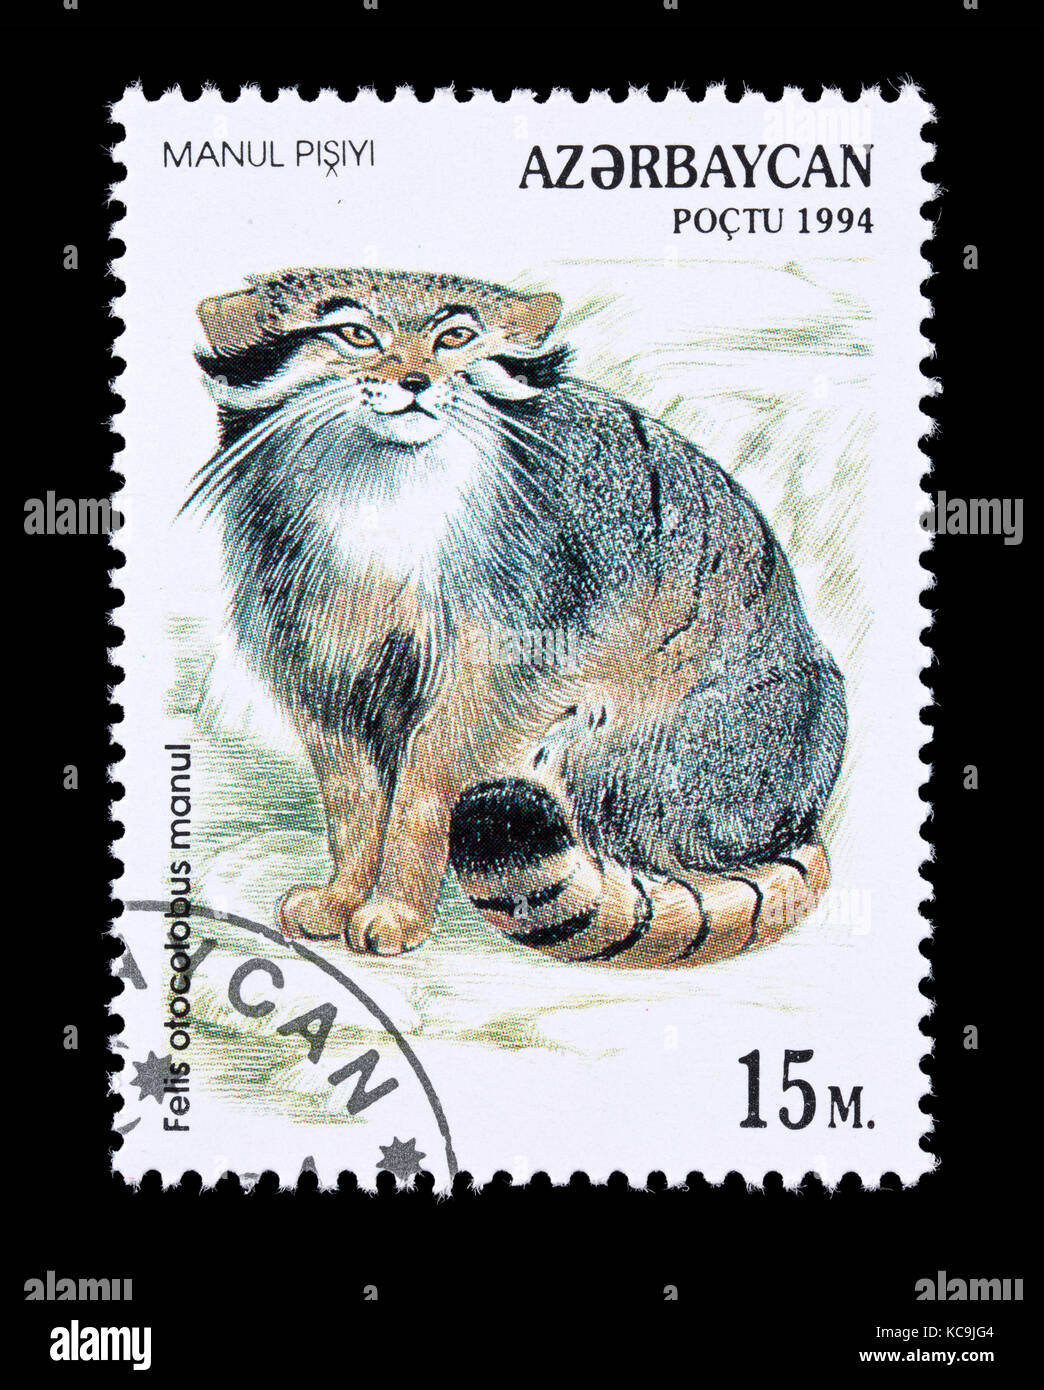 Postage stamp from Azerbaijan depicting a Pallas's cat (Otocolobus manul) Stock Photo